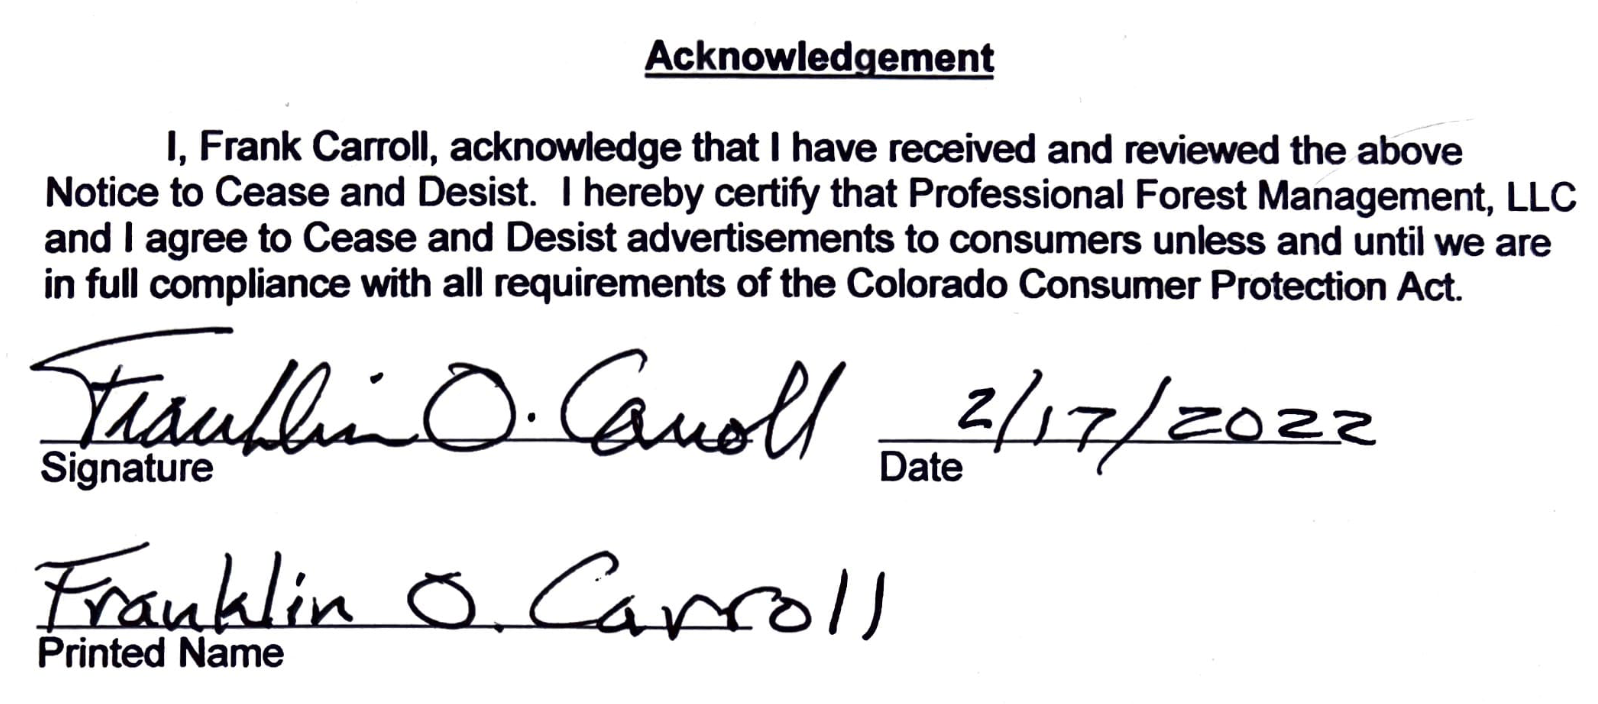 Acknowledgement of cease-and-desist letter